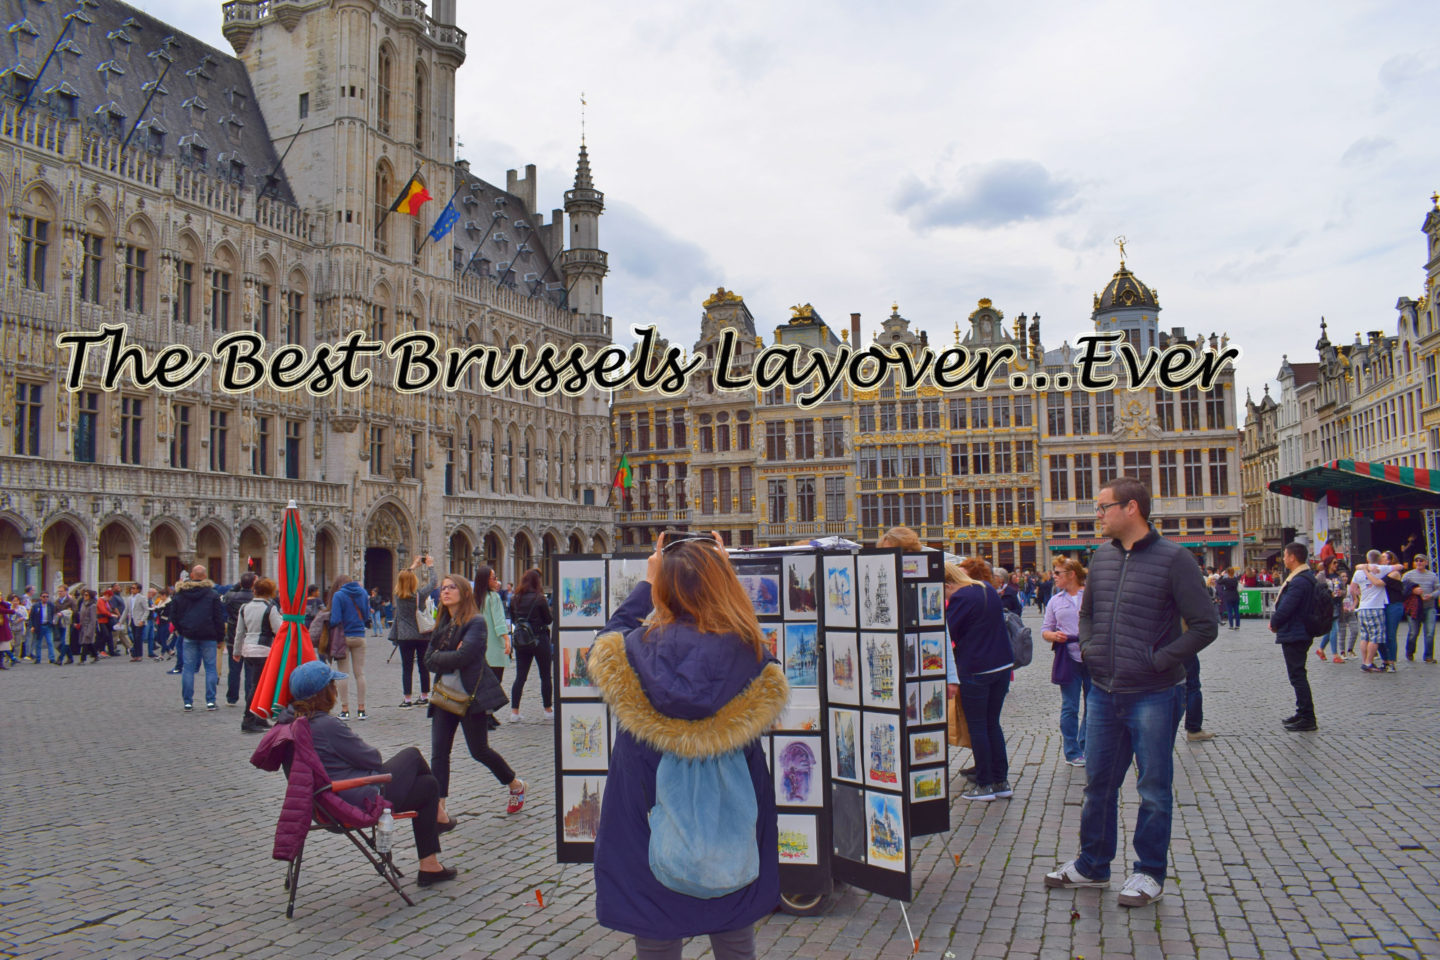 Stop in the Grand Place on your Belgian layover